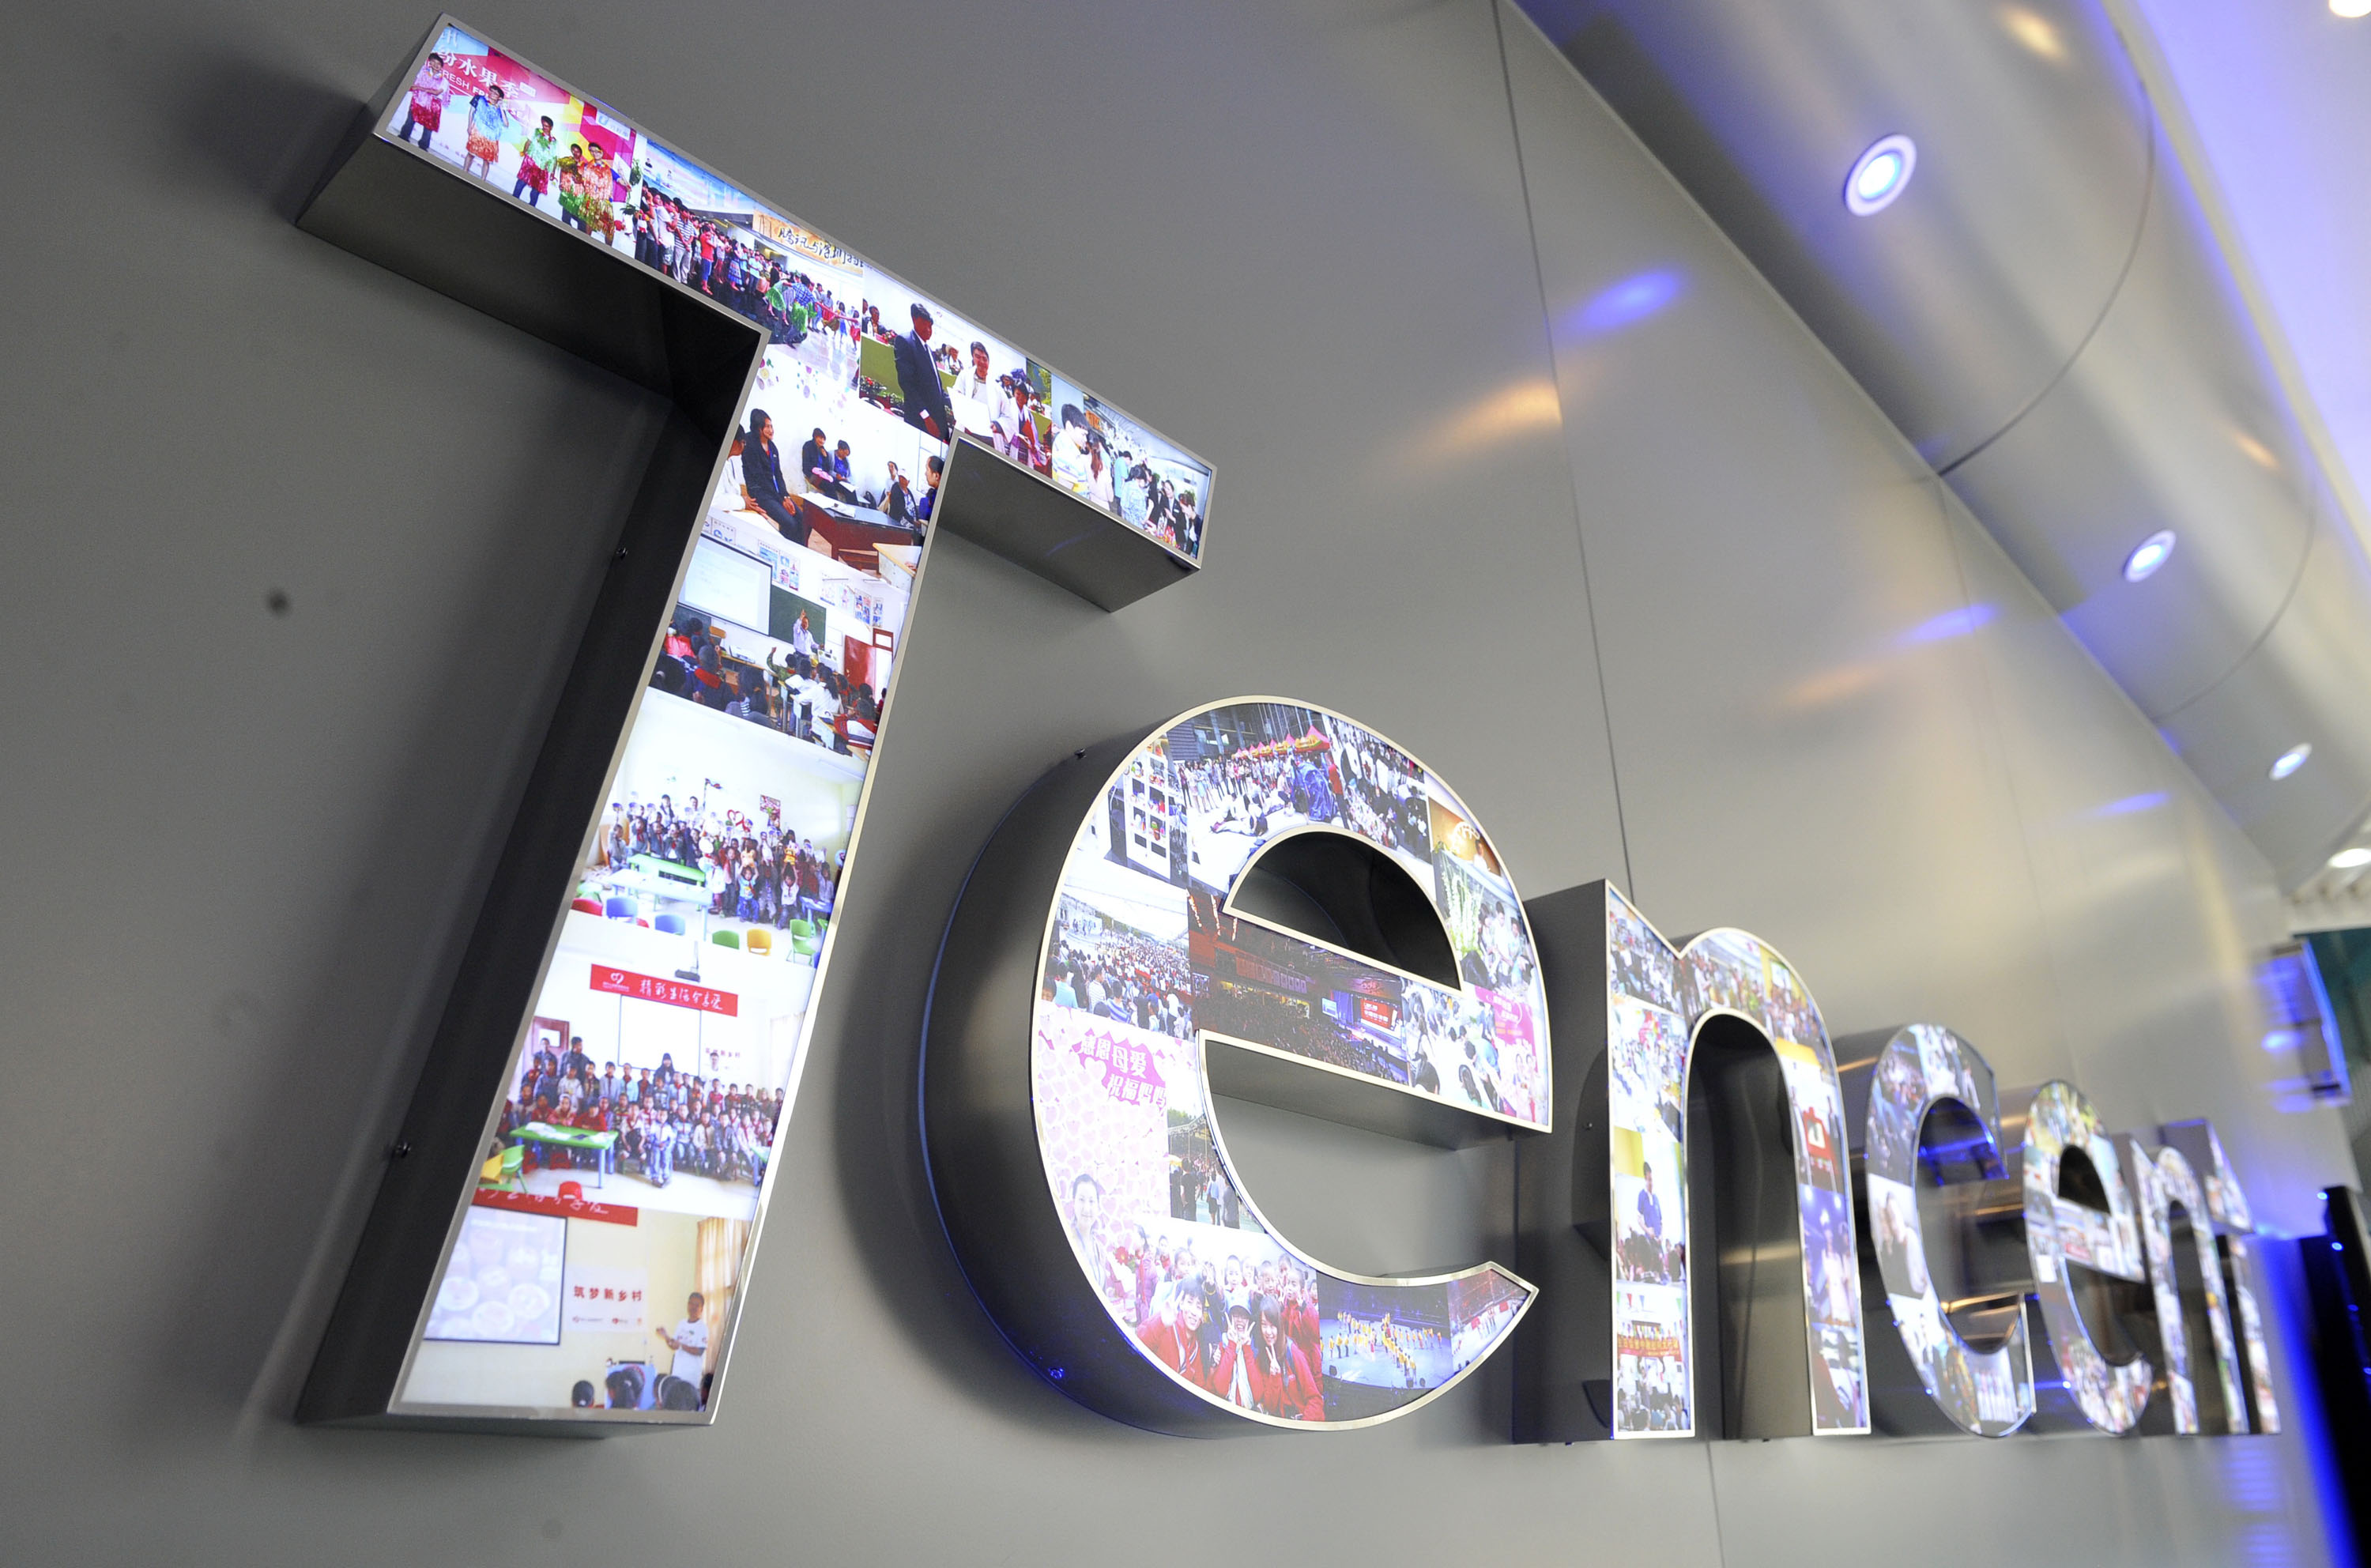 The headquarters of Internet firm Tencent in Shenzhen, south China's Guangdong Province. Photo: Xinhua